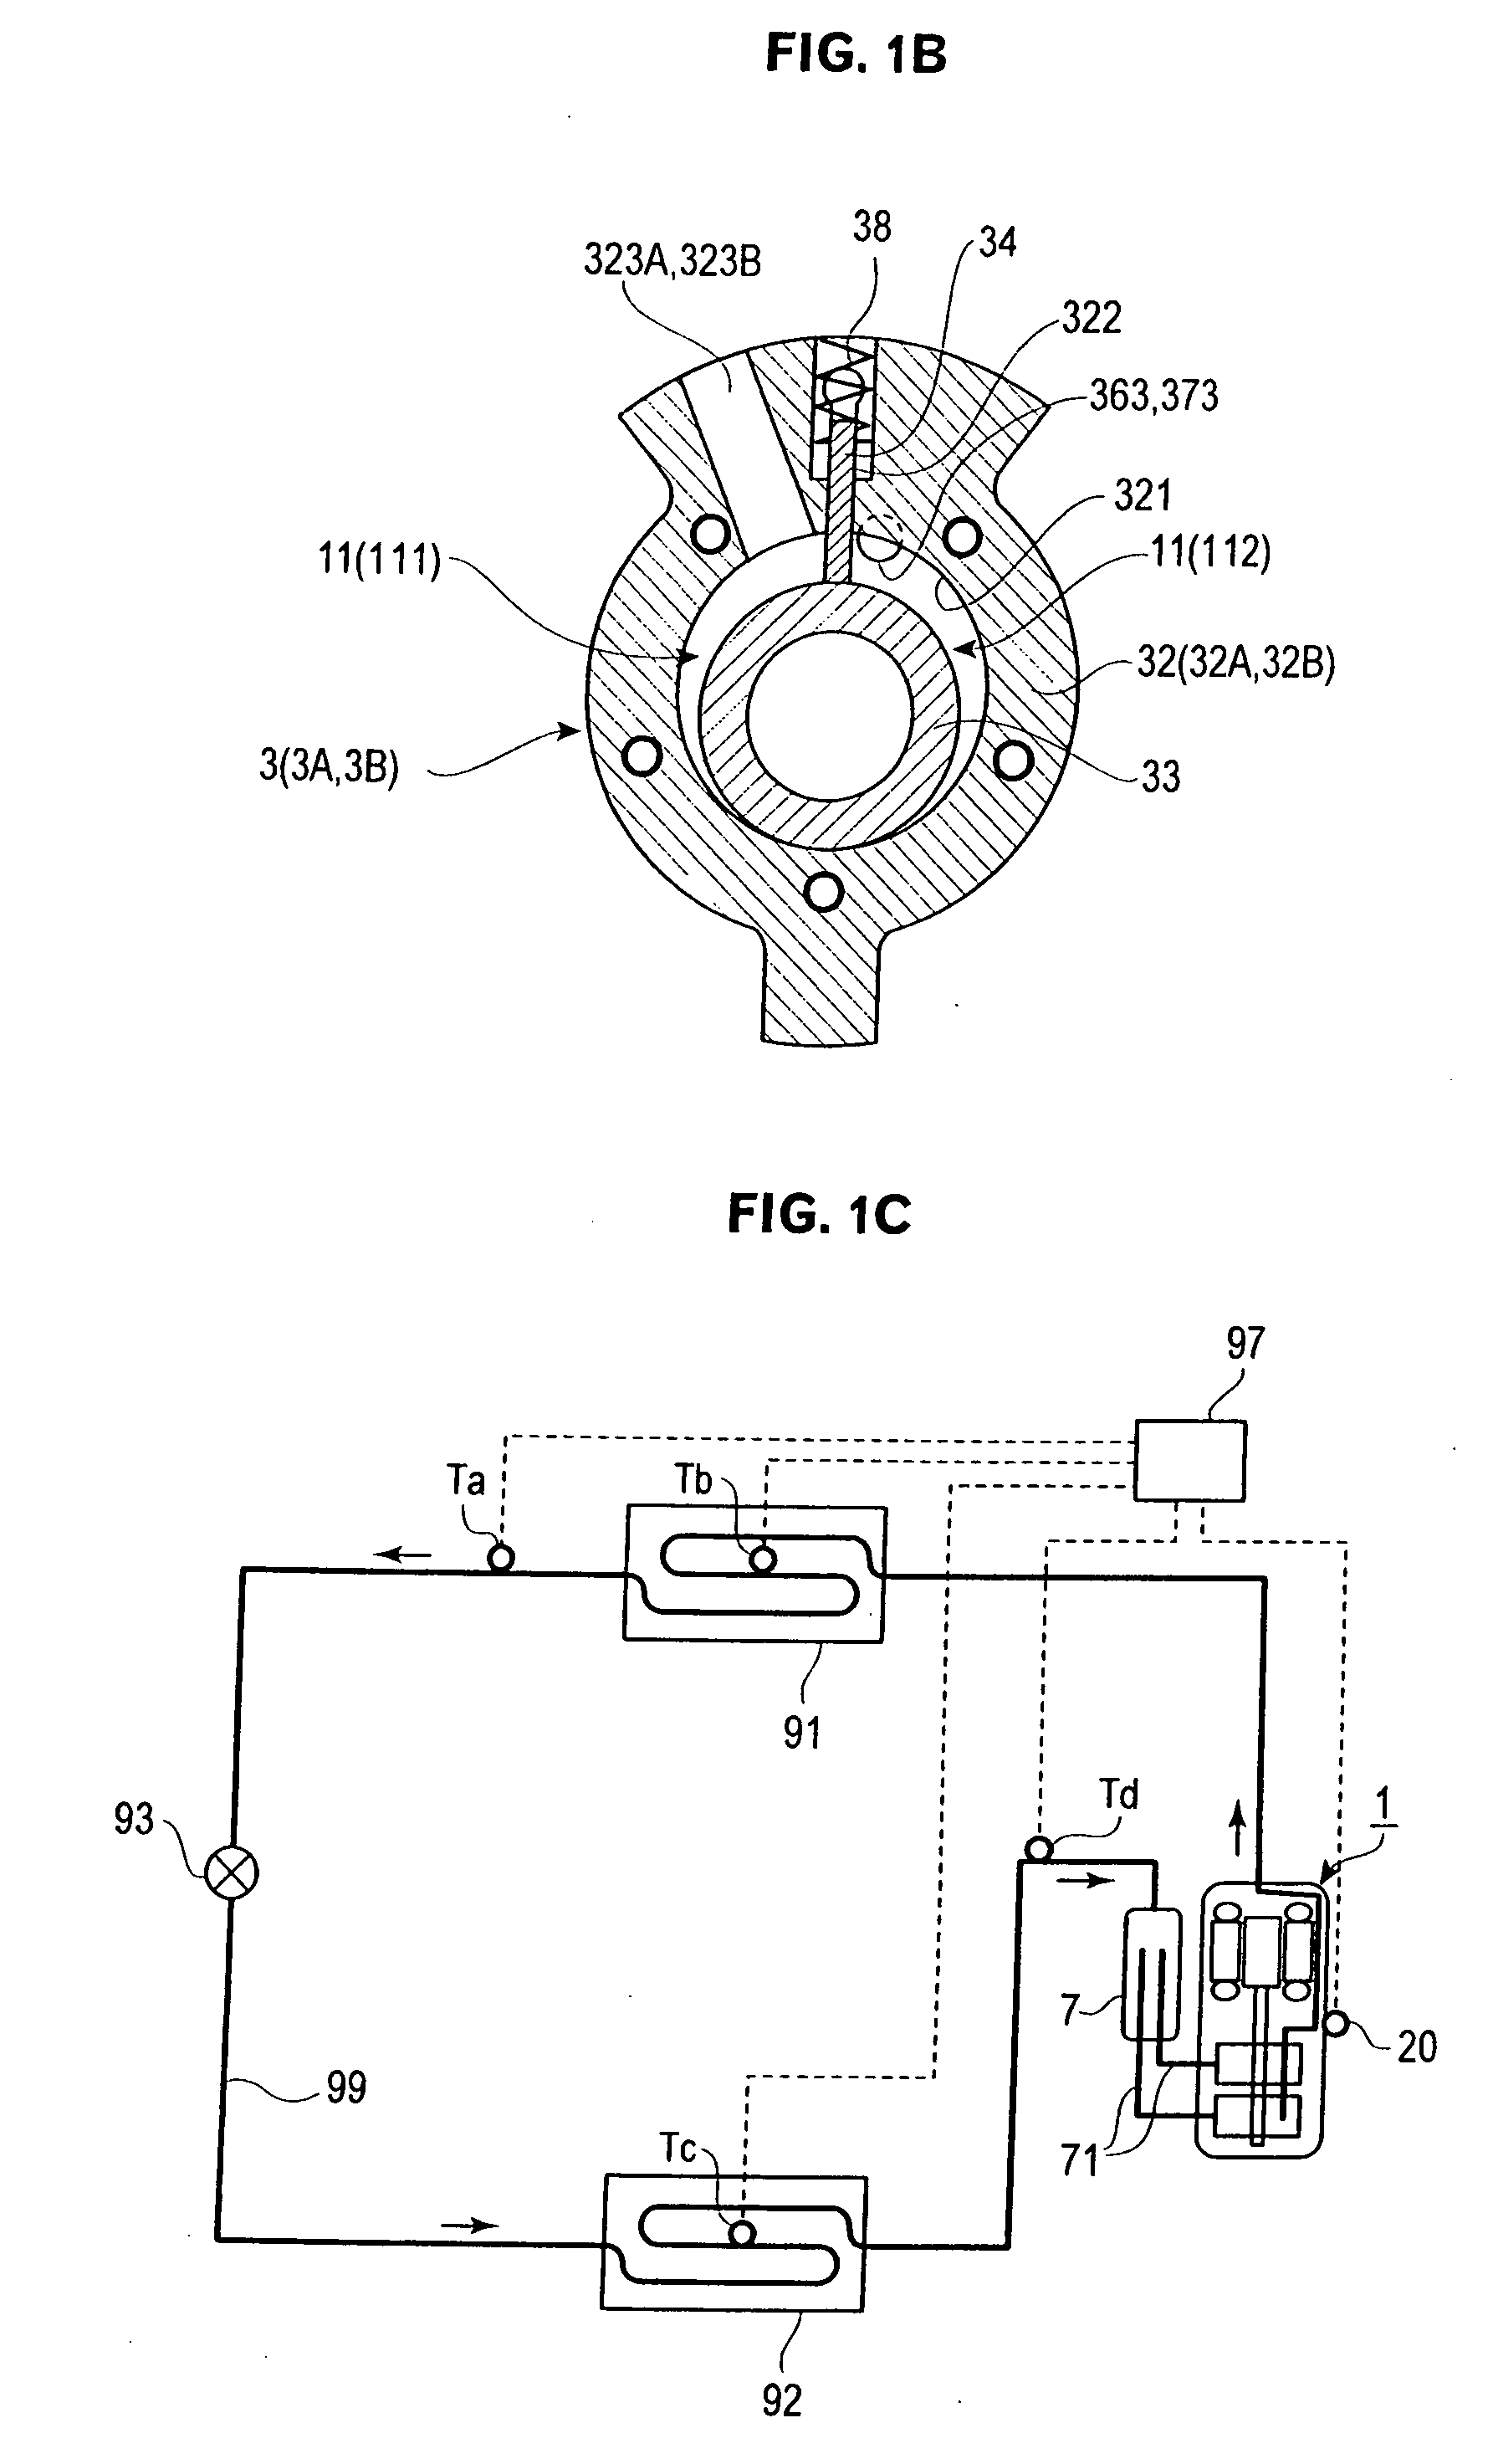 Rotary compressor and heat pump system